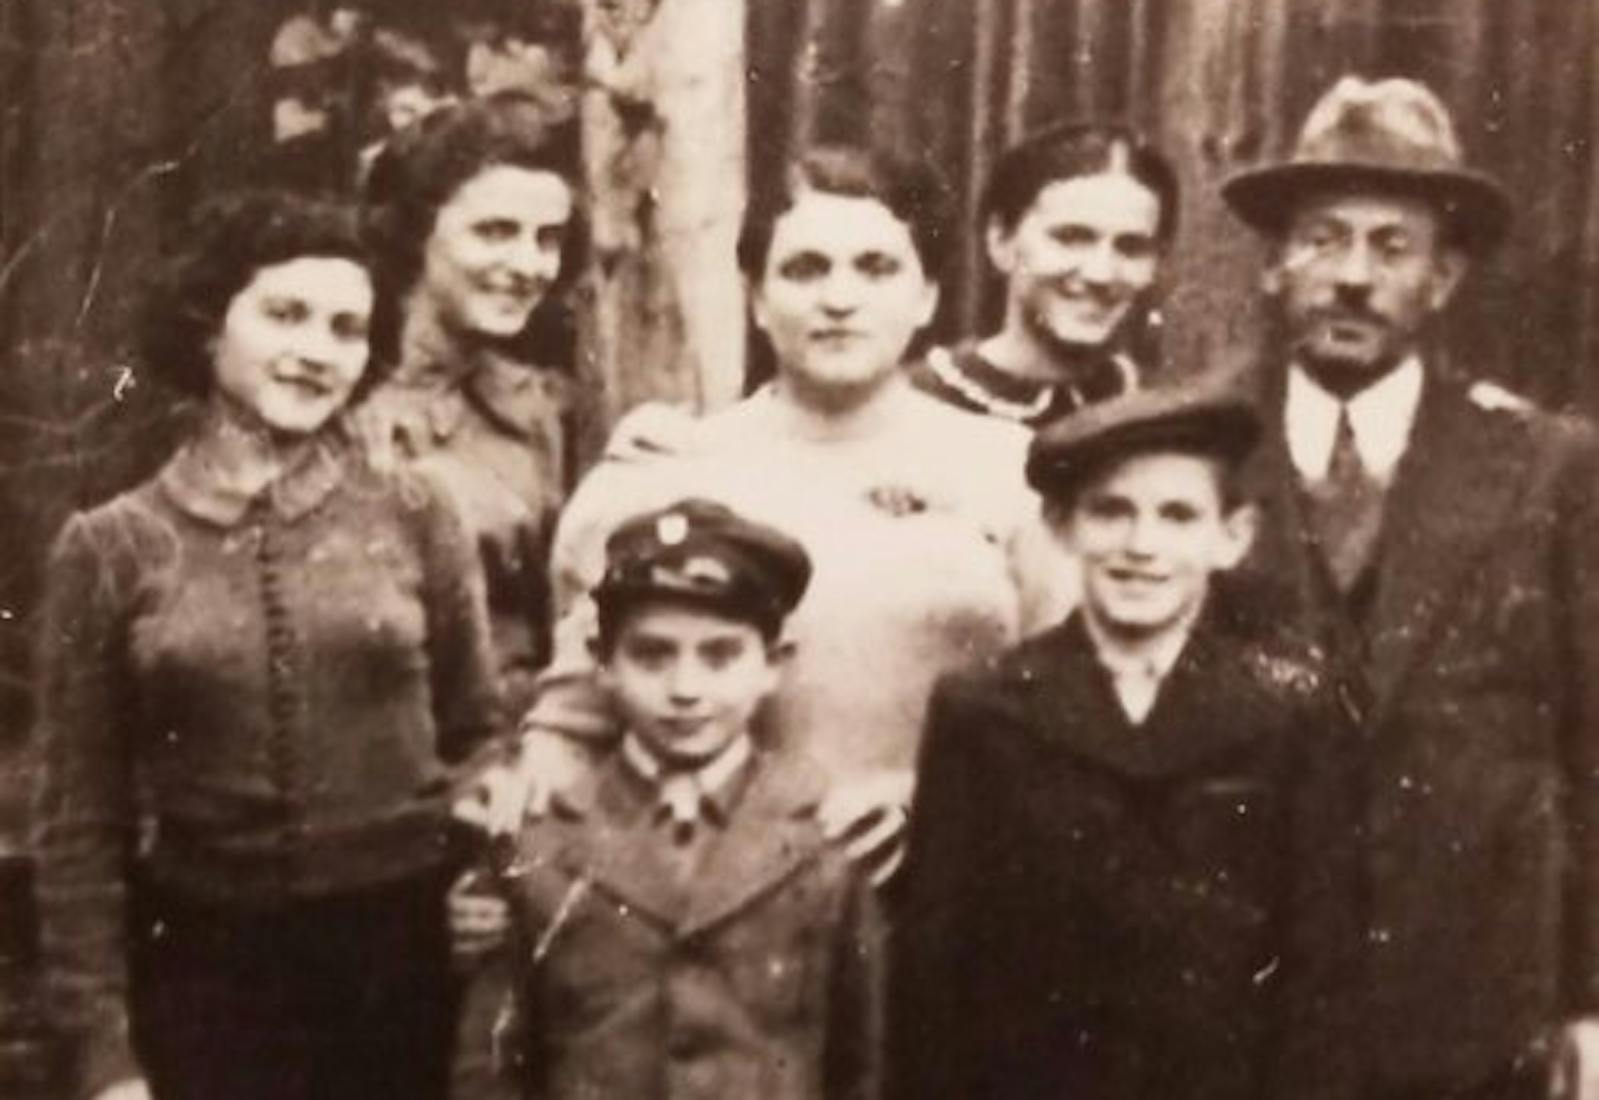 Rose and Helen (Left to right in the back row) and their mother Esther (center) in Prosczowice, Poland in 1938.